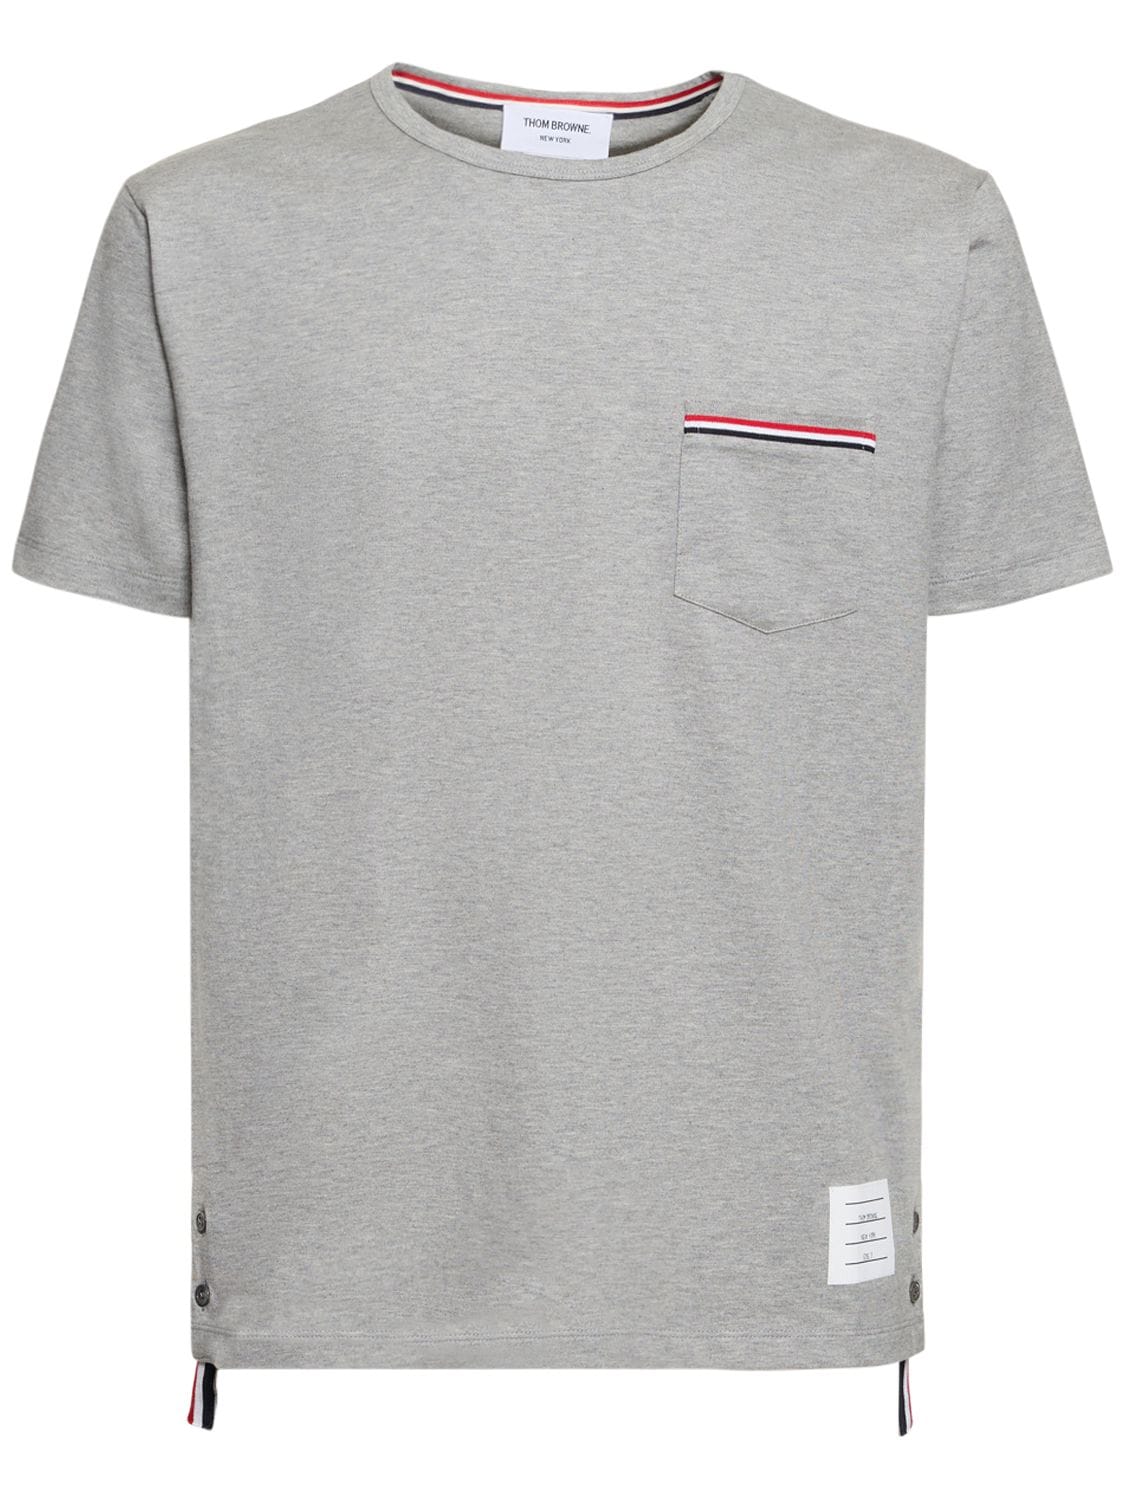 Thom Browne Oversized Tricolour Pocket T-shirt In Light Grey